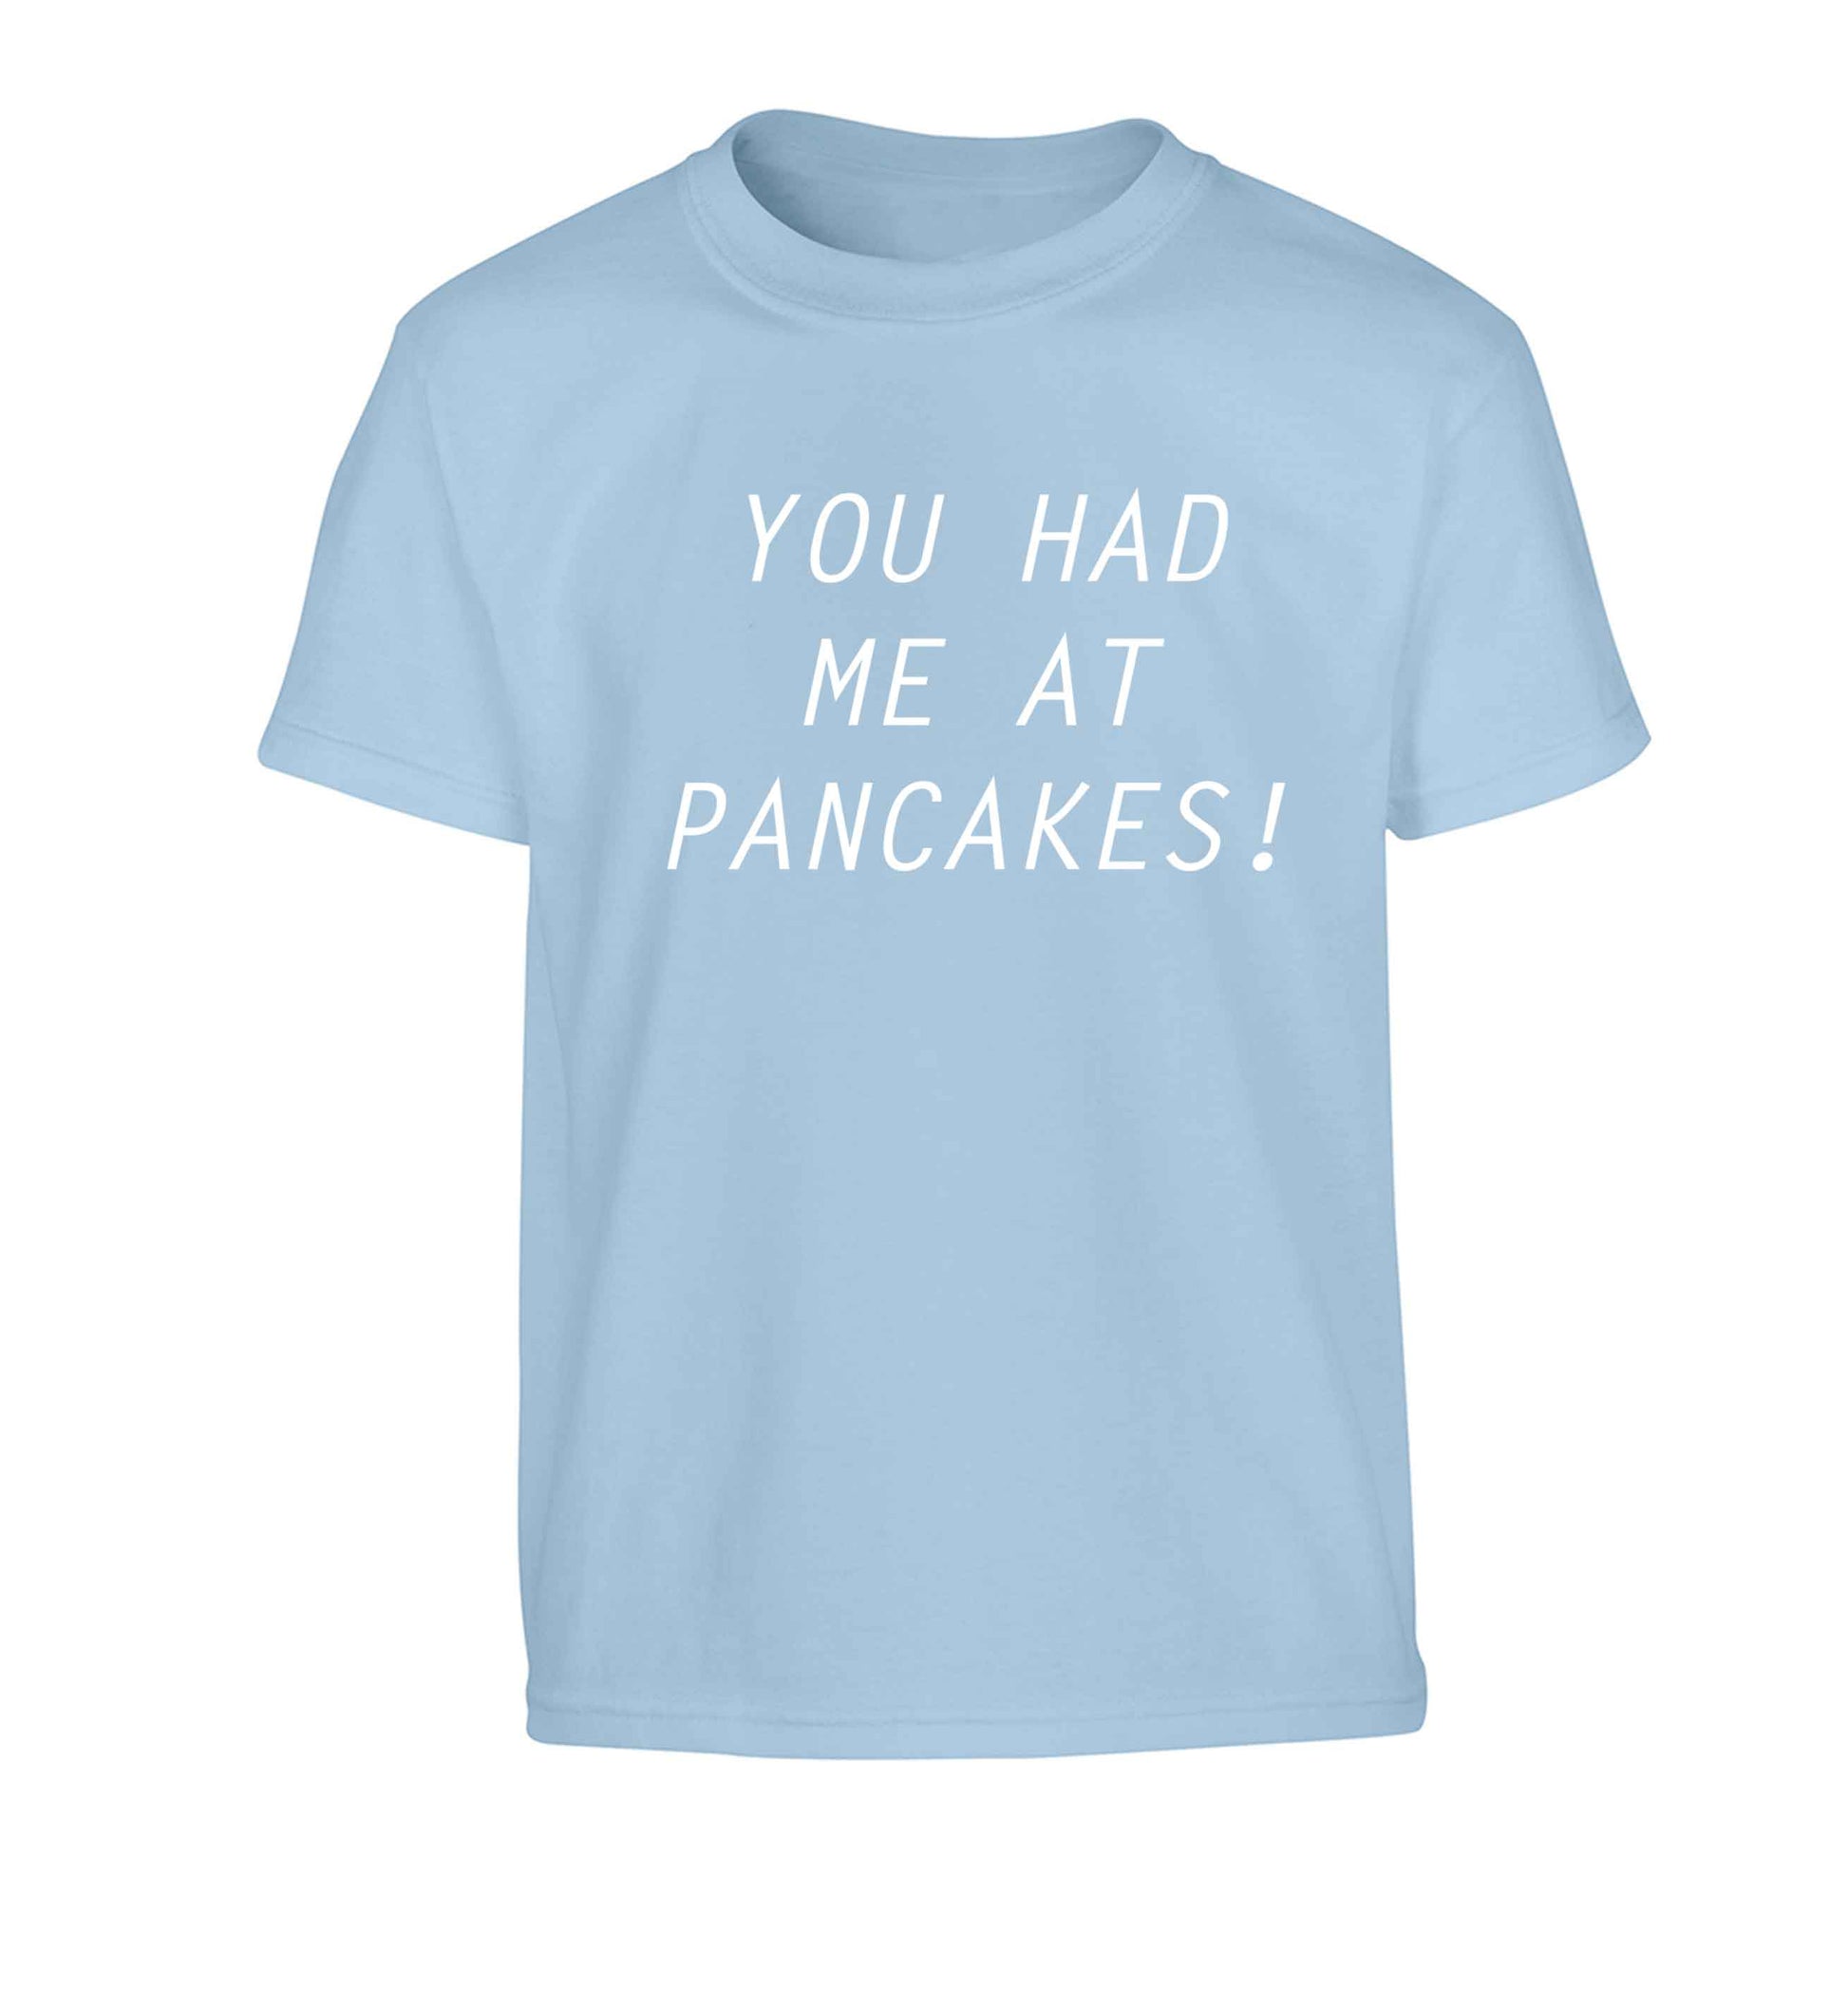 You had me at pancakes Children's light blue Tshirt 12-13 Years